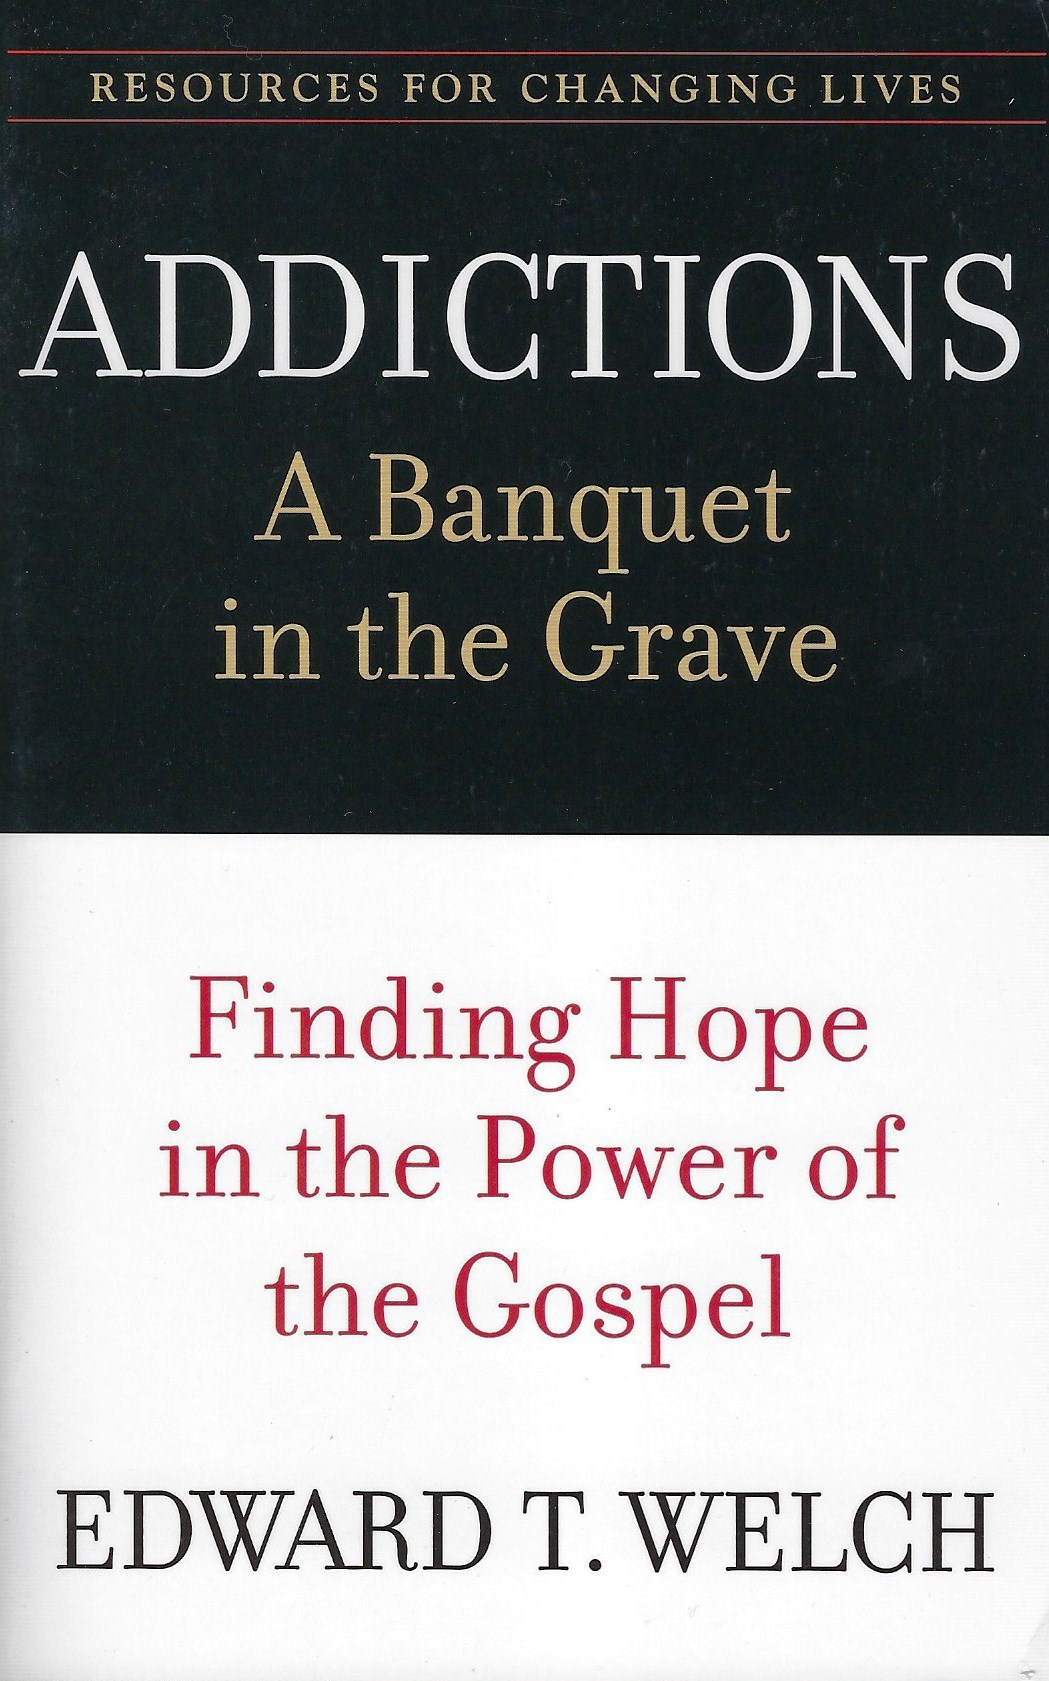 ADDICTIONS - A BANQUET IN THE GRAVE Edward T. Welch